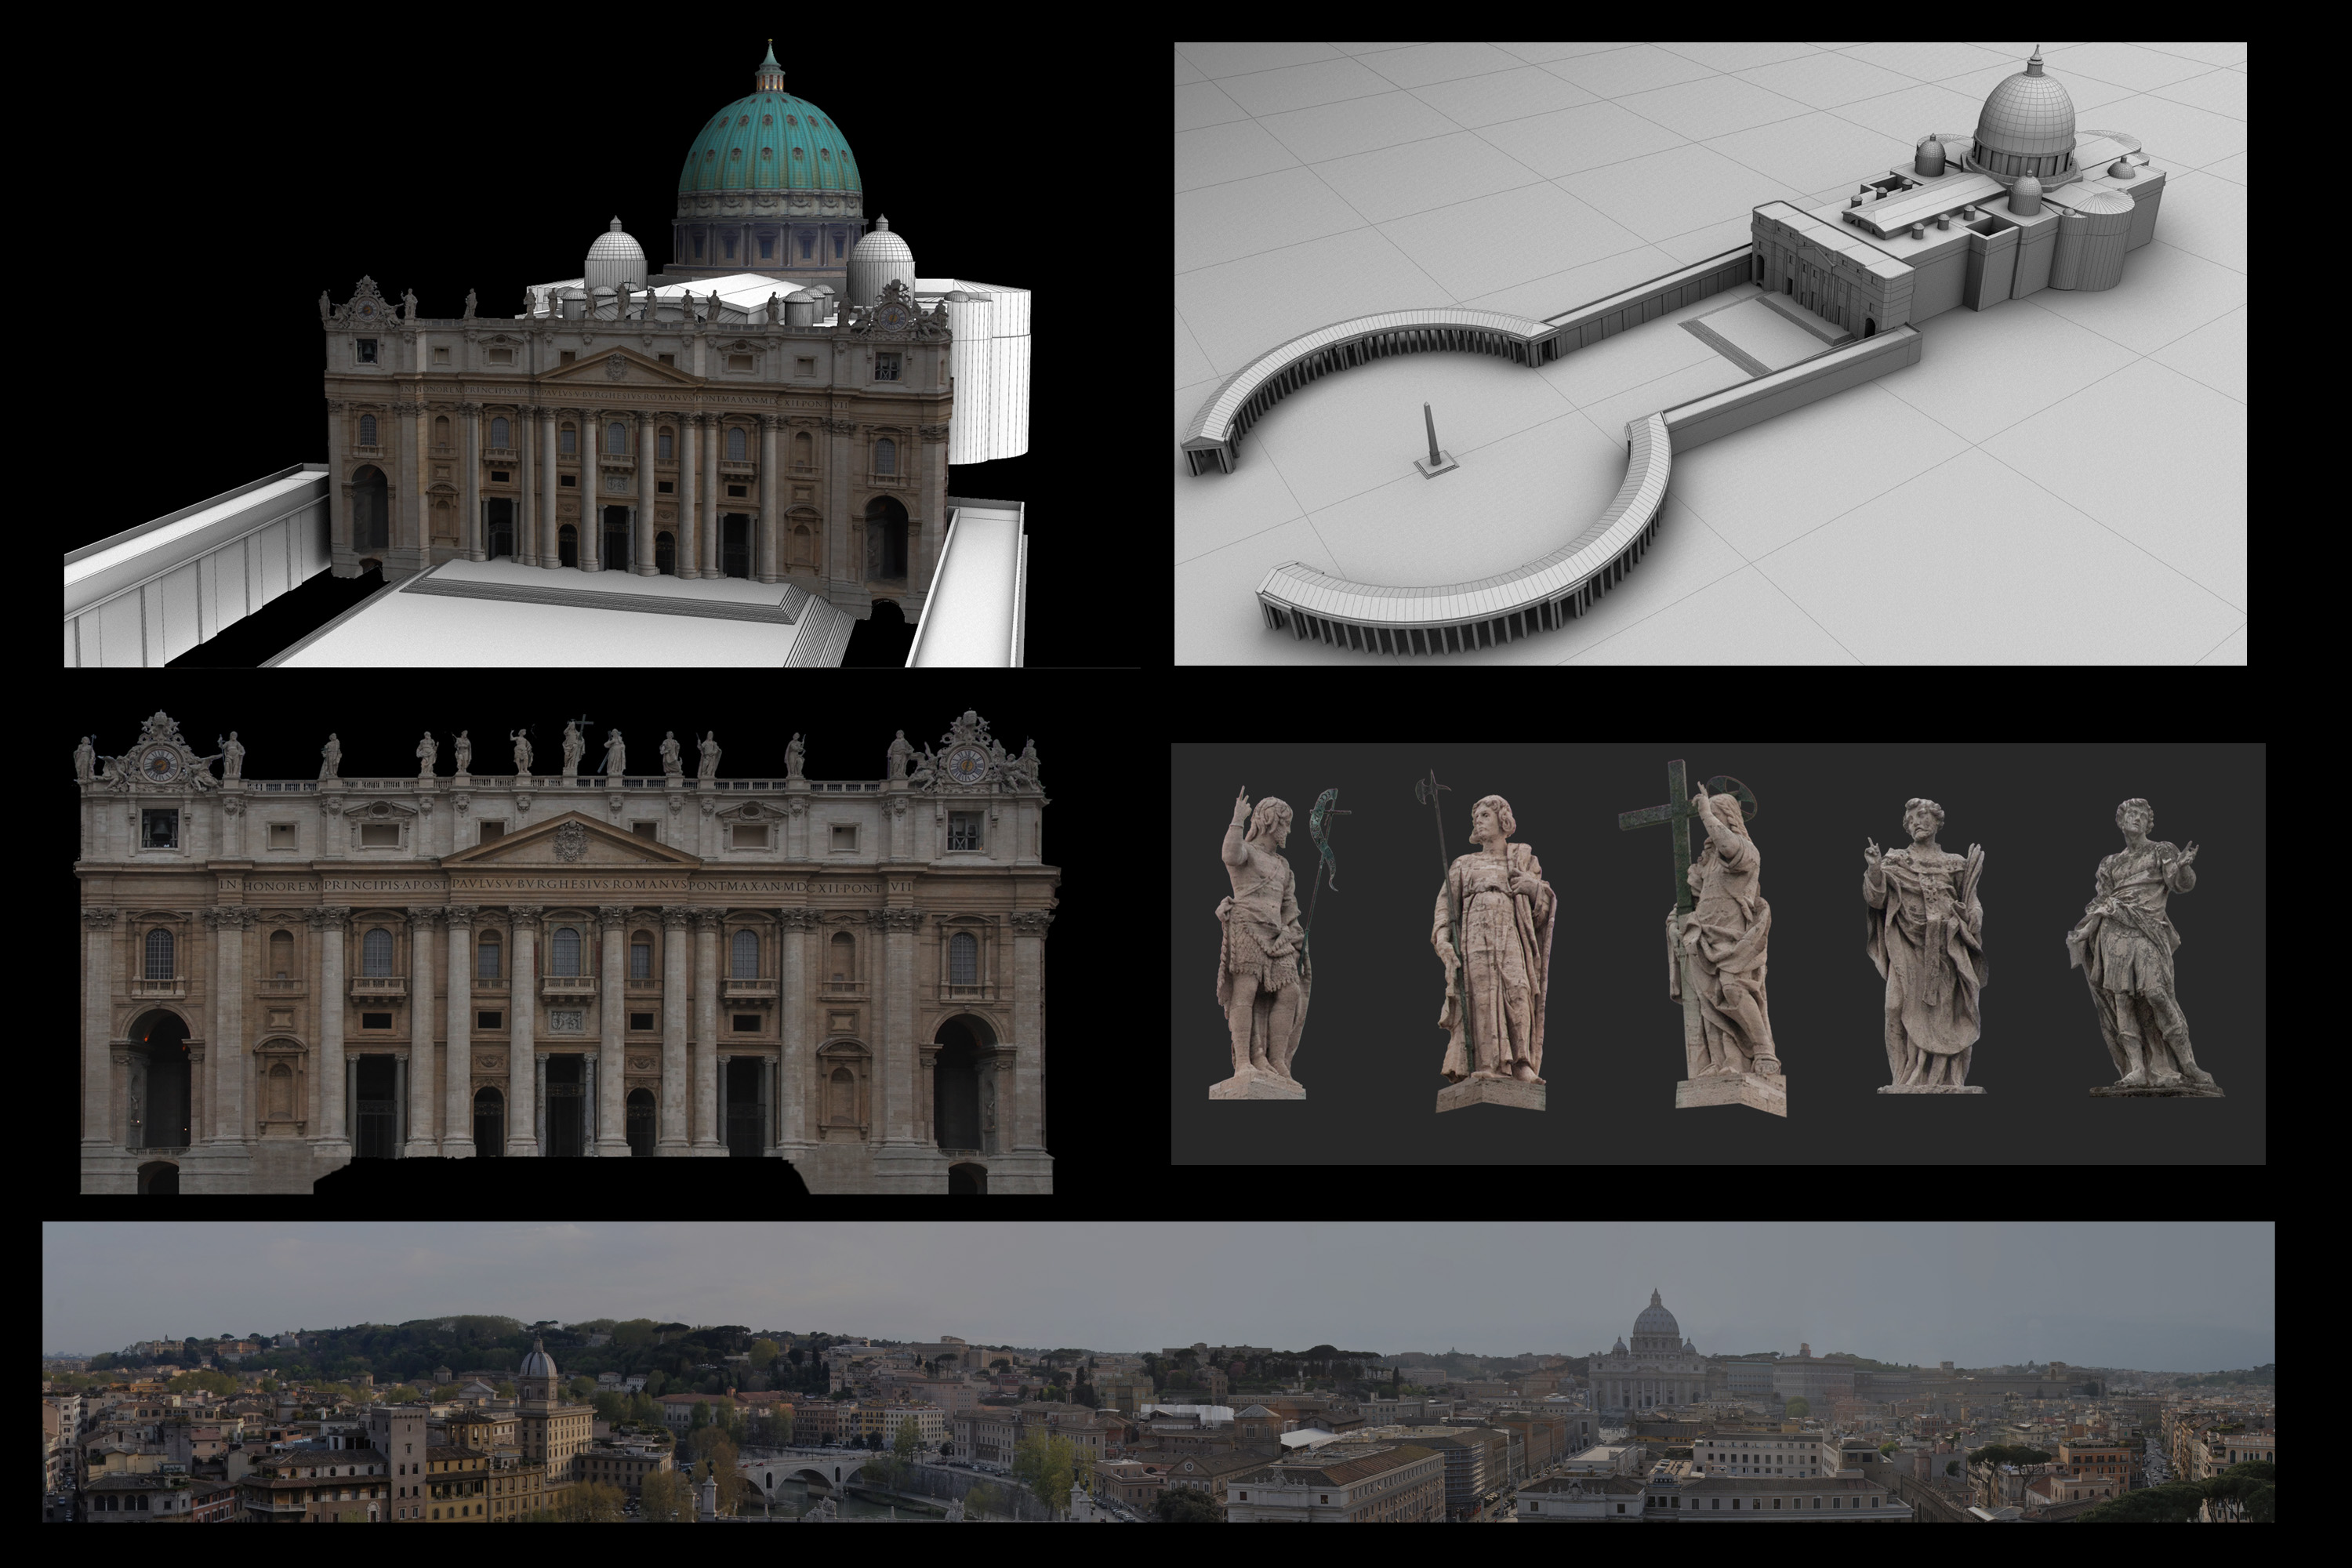 Rome panorama and St. Peters Basilica. Matte-painting, 3D modeling, texturing, 3D environments by Edward Grad